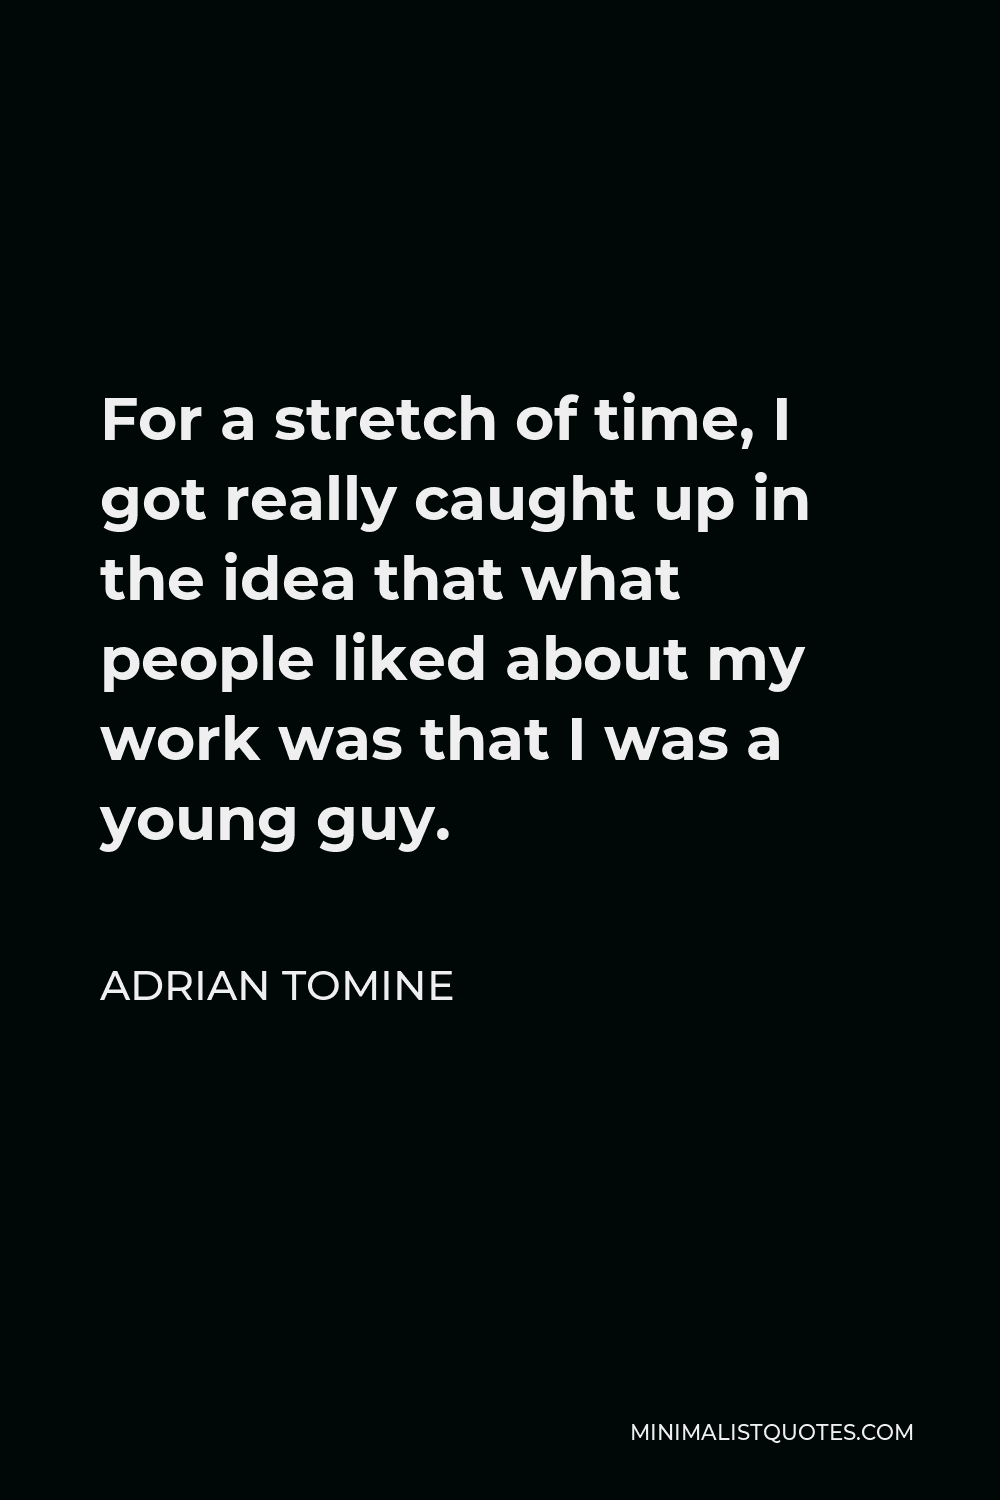 Adrian Tomine Quote - For a stretch of time, I got really caught up in the idea that what people liked about my work was that I was a young guy.